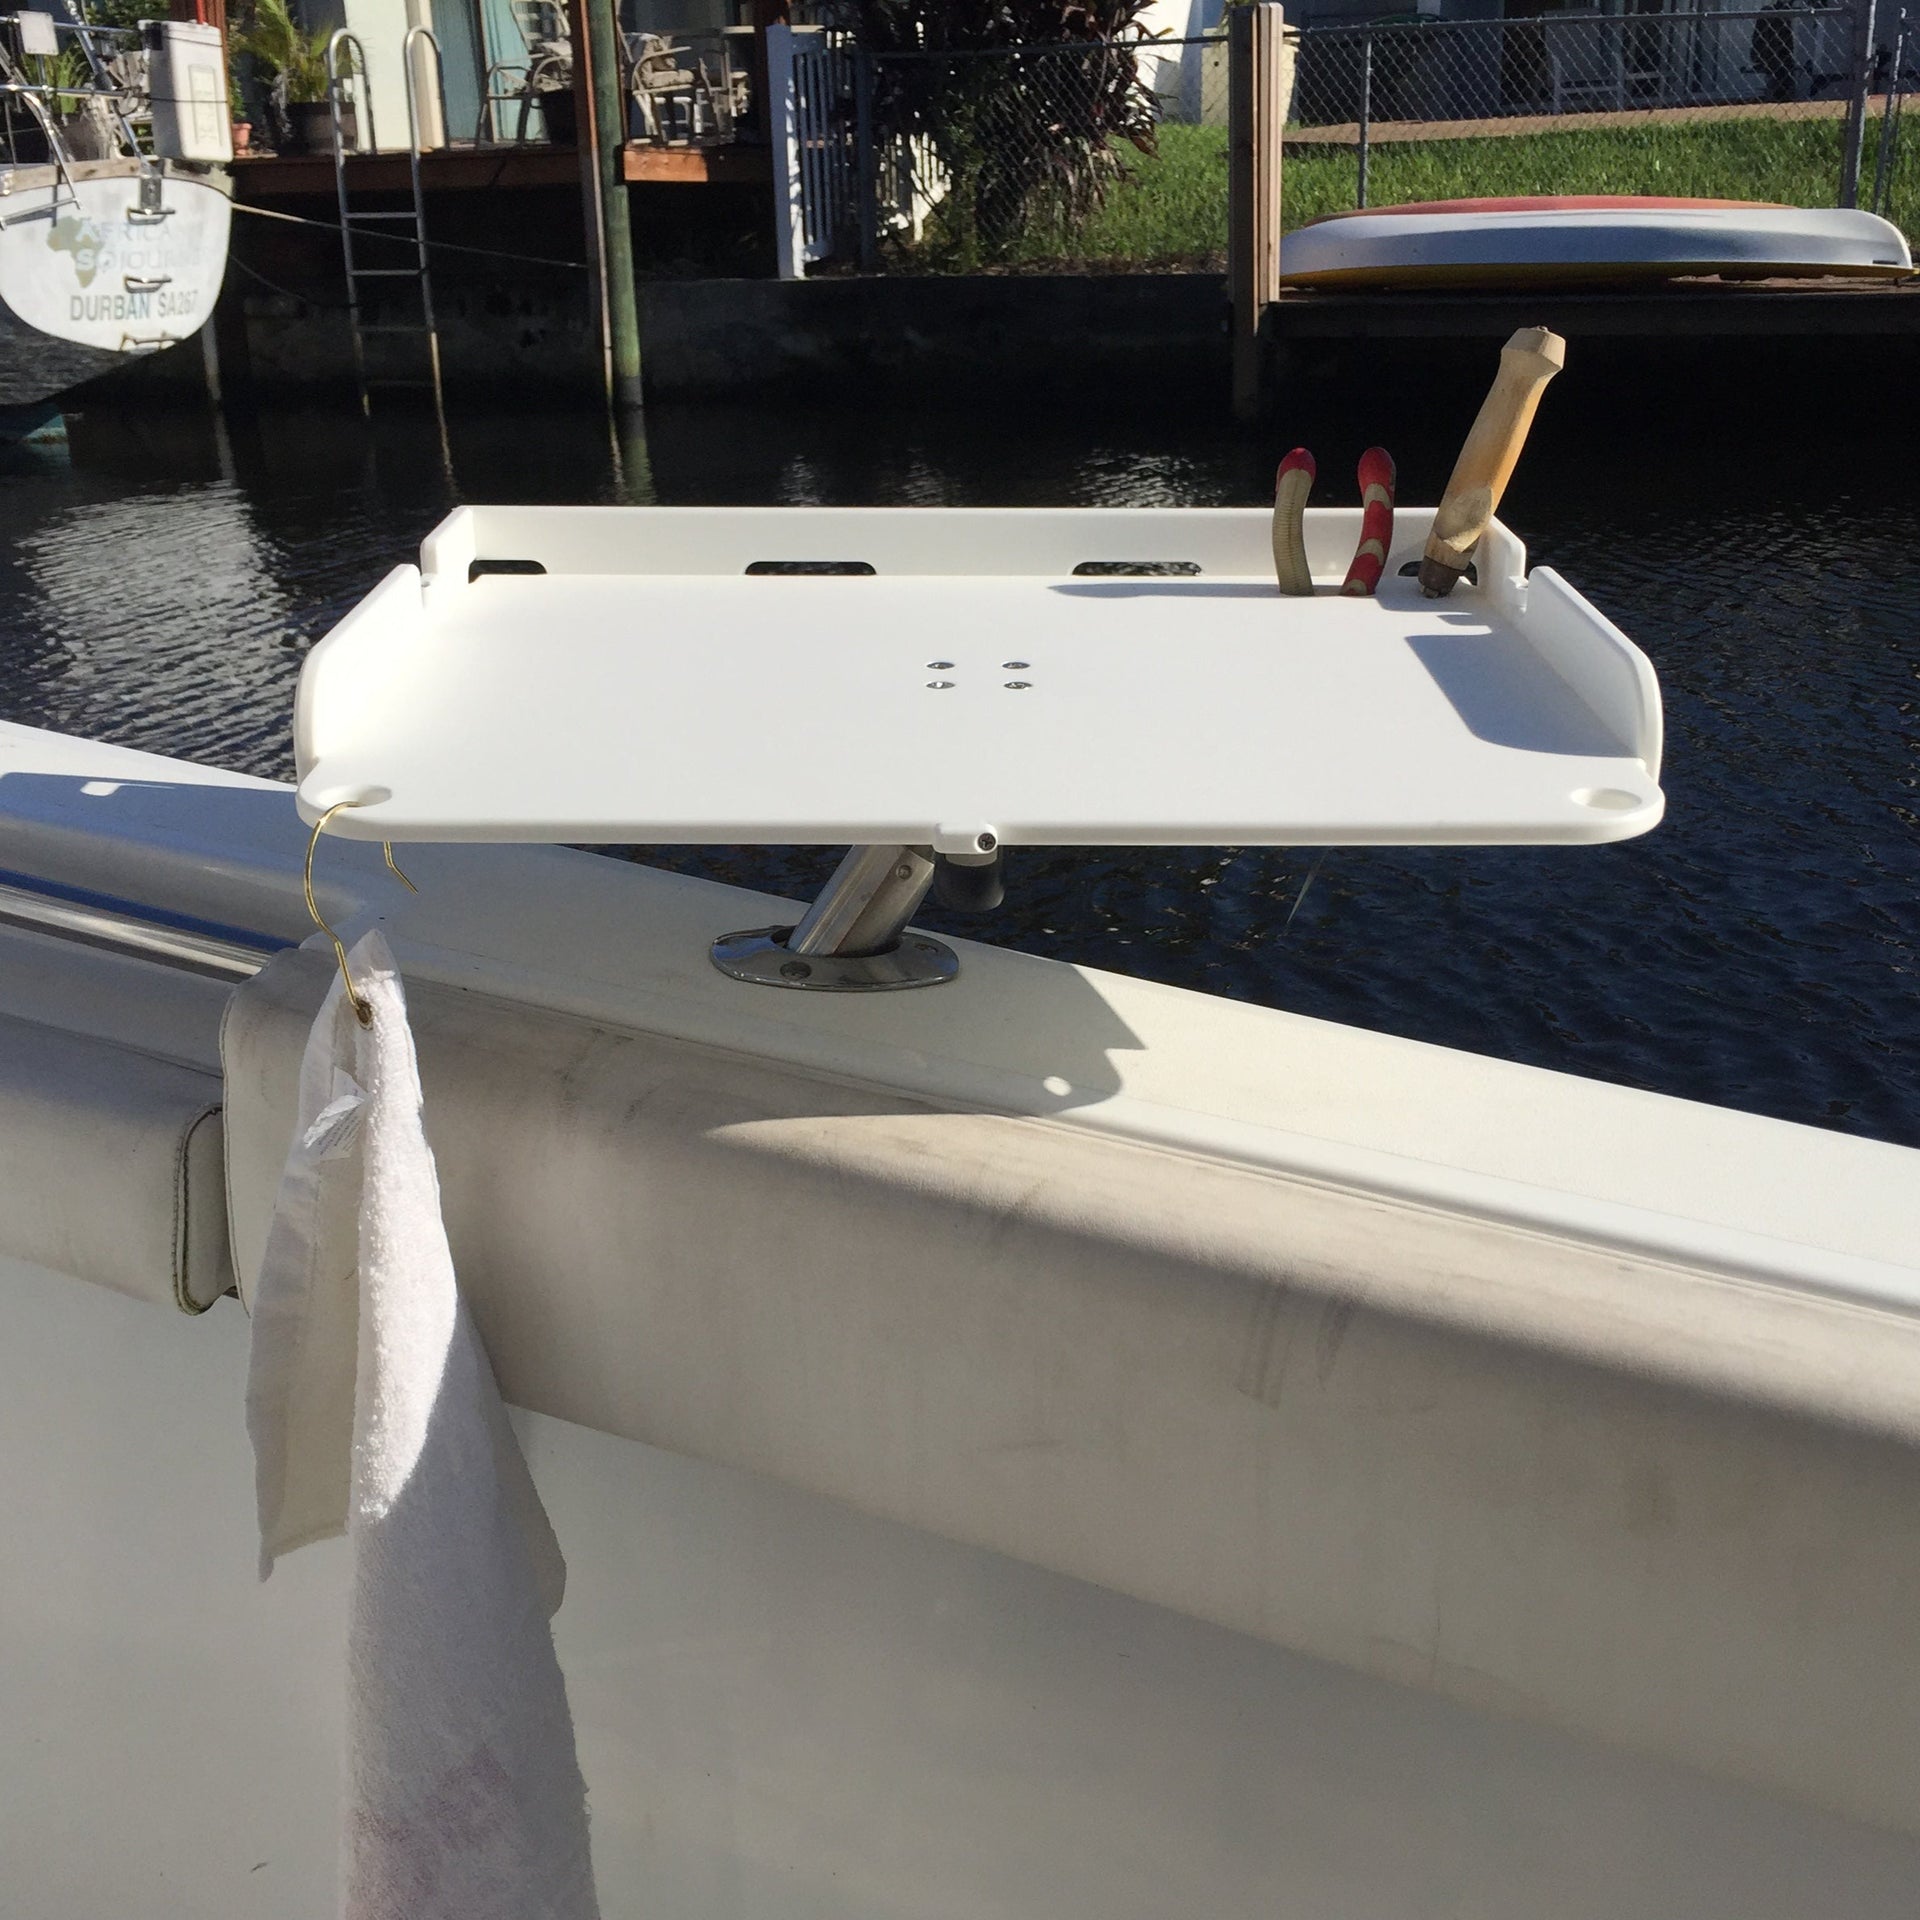 Docktail Fillet & Bait Table w/ Magma LeveLock - All Angle Adjustable Rod Holder Mount for Center Console, Pontoon, Sportfishing, Cruisers, Tenders